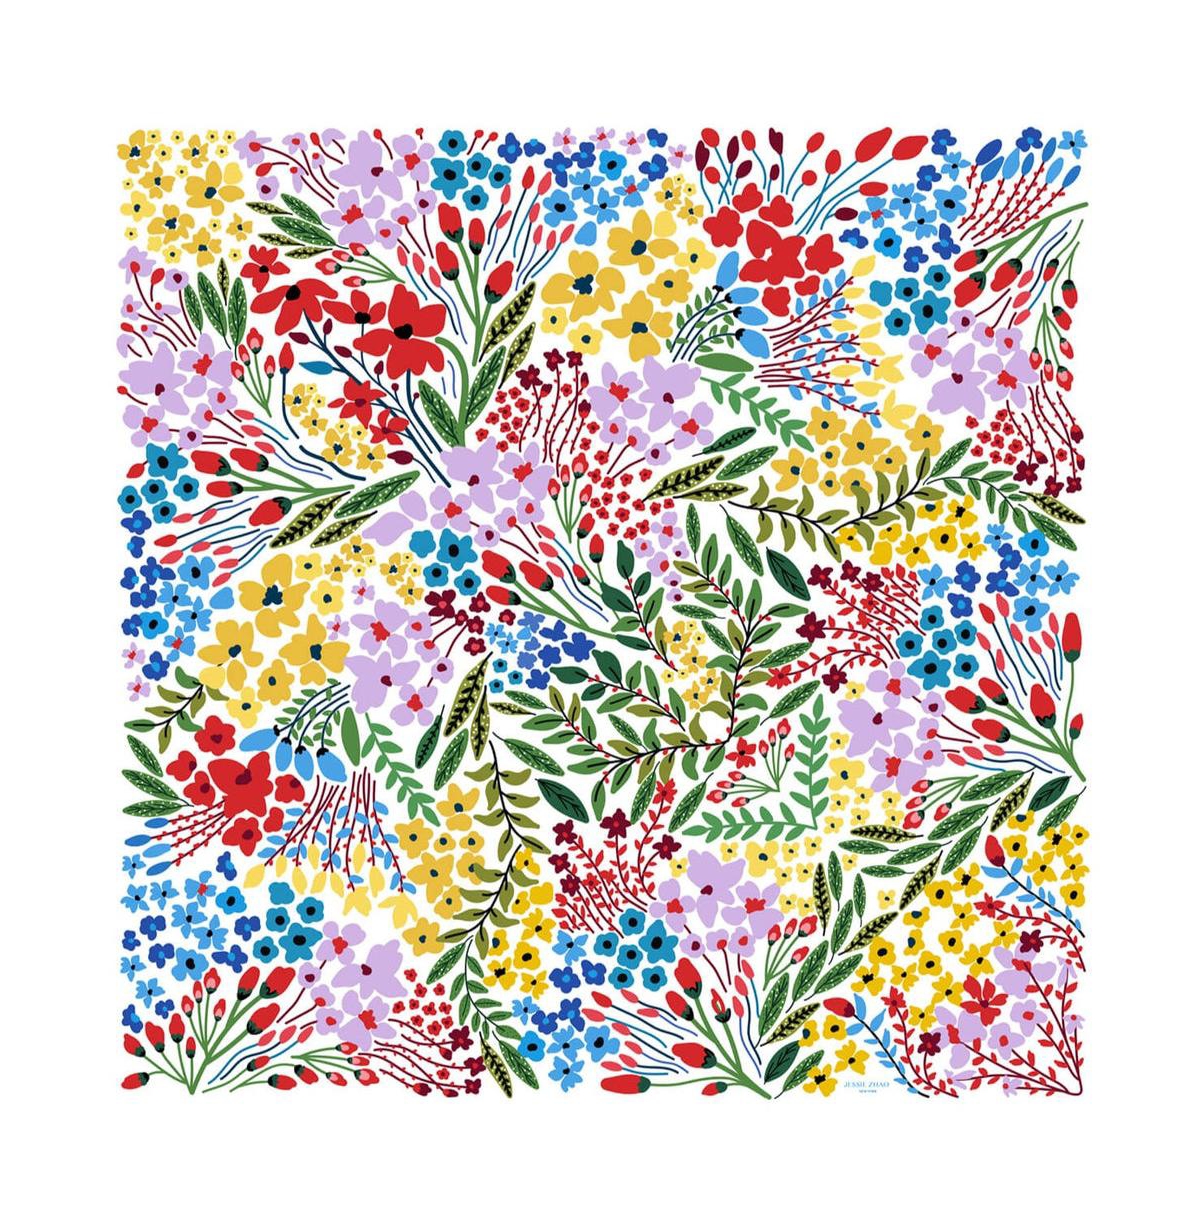 Silk Scarf of Blooms - White, red,blue,green,purple